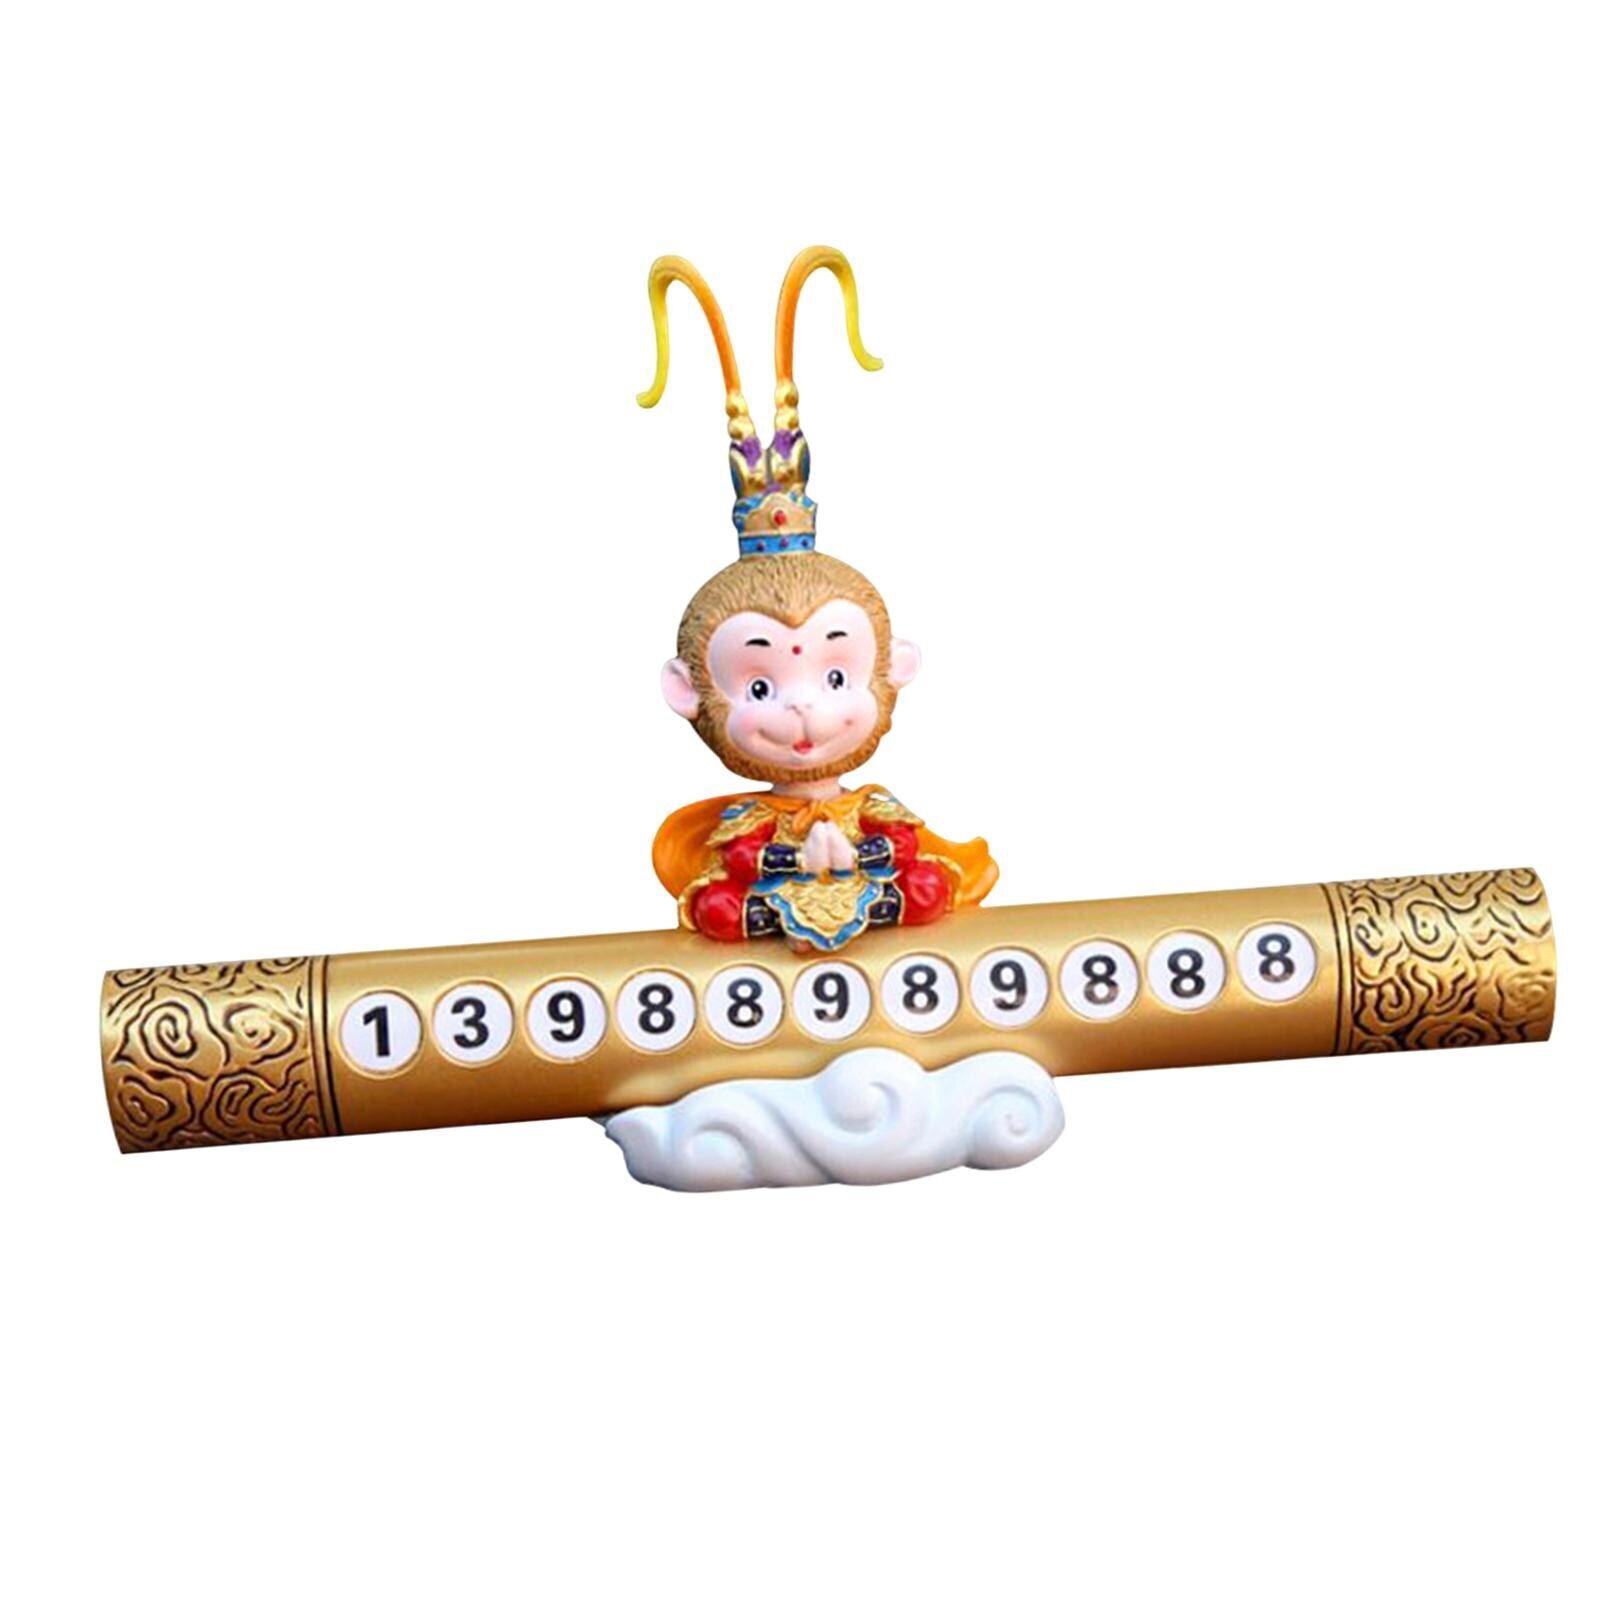 Car Parking Number Plate Small Monkey Ornament Parking Phone Number Plate